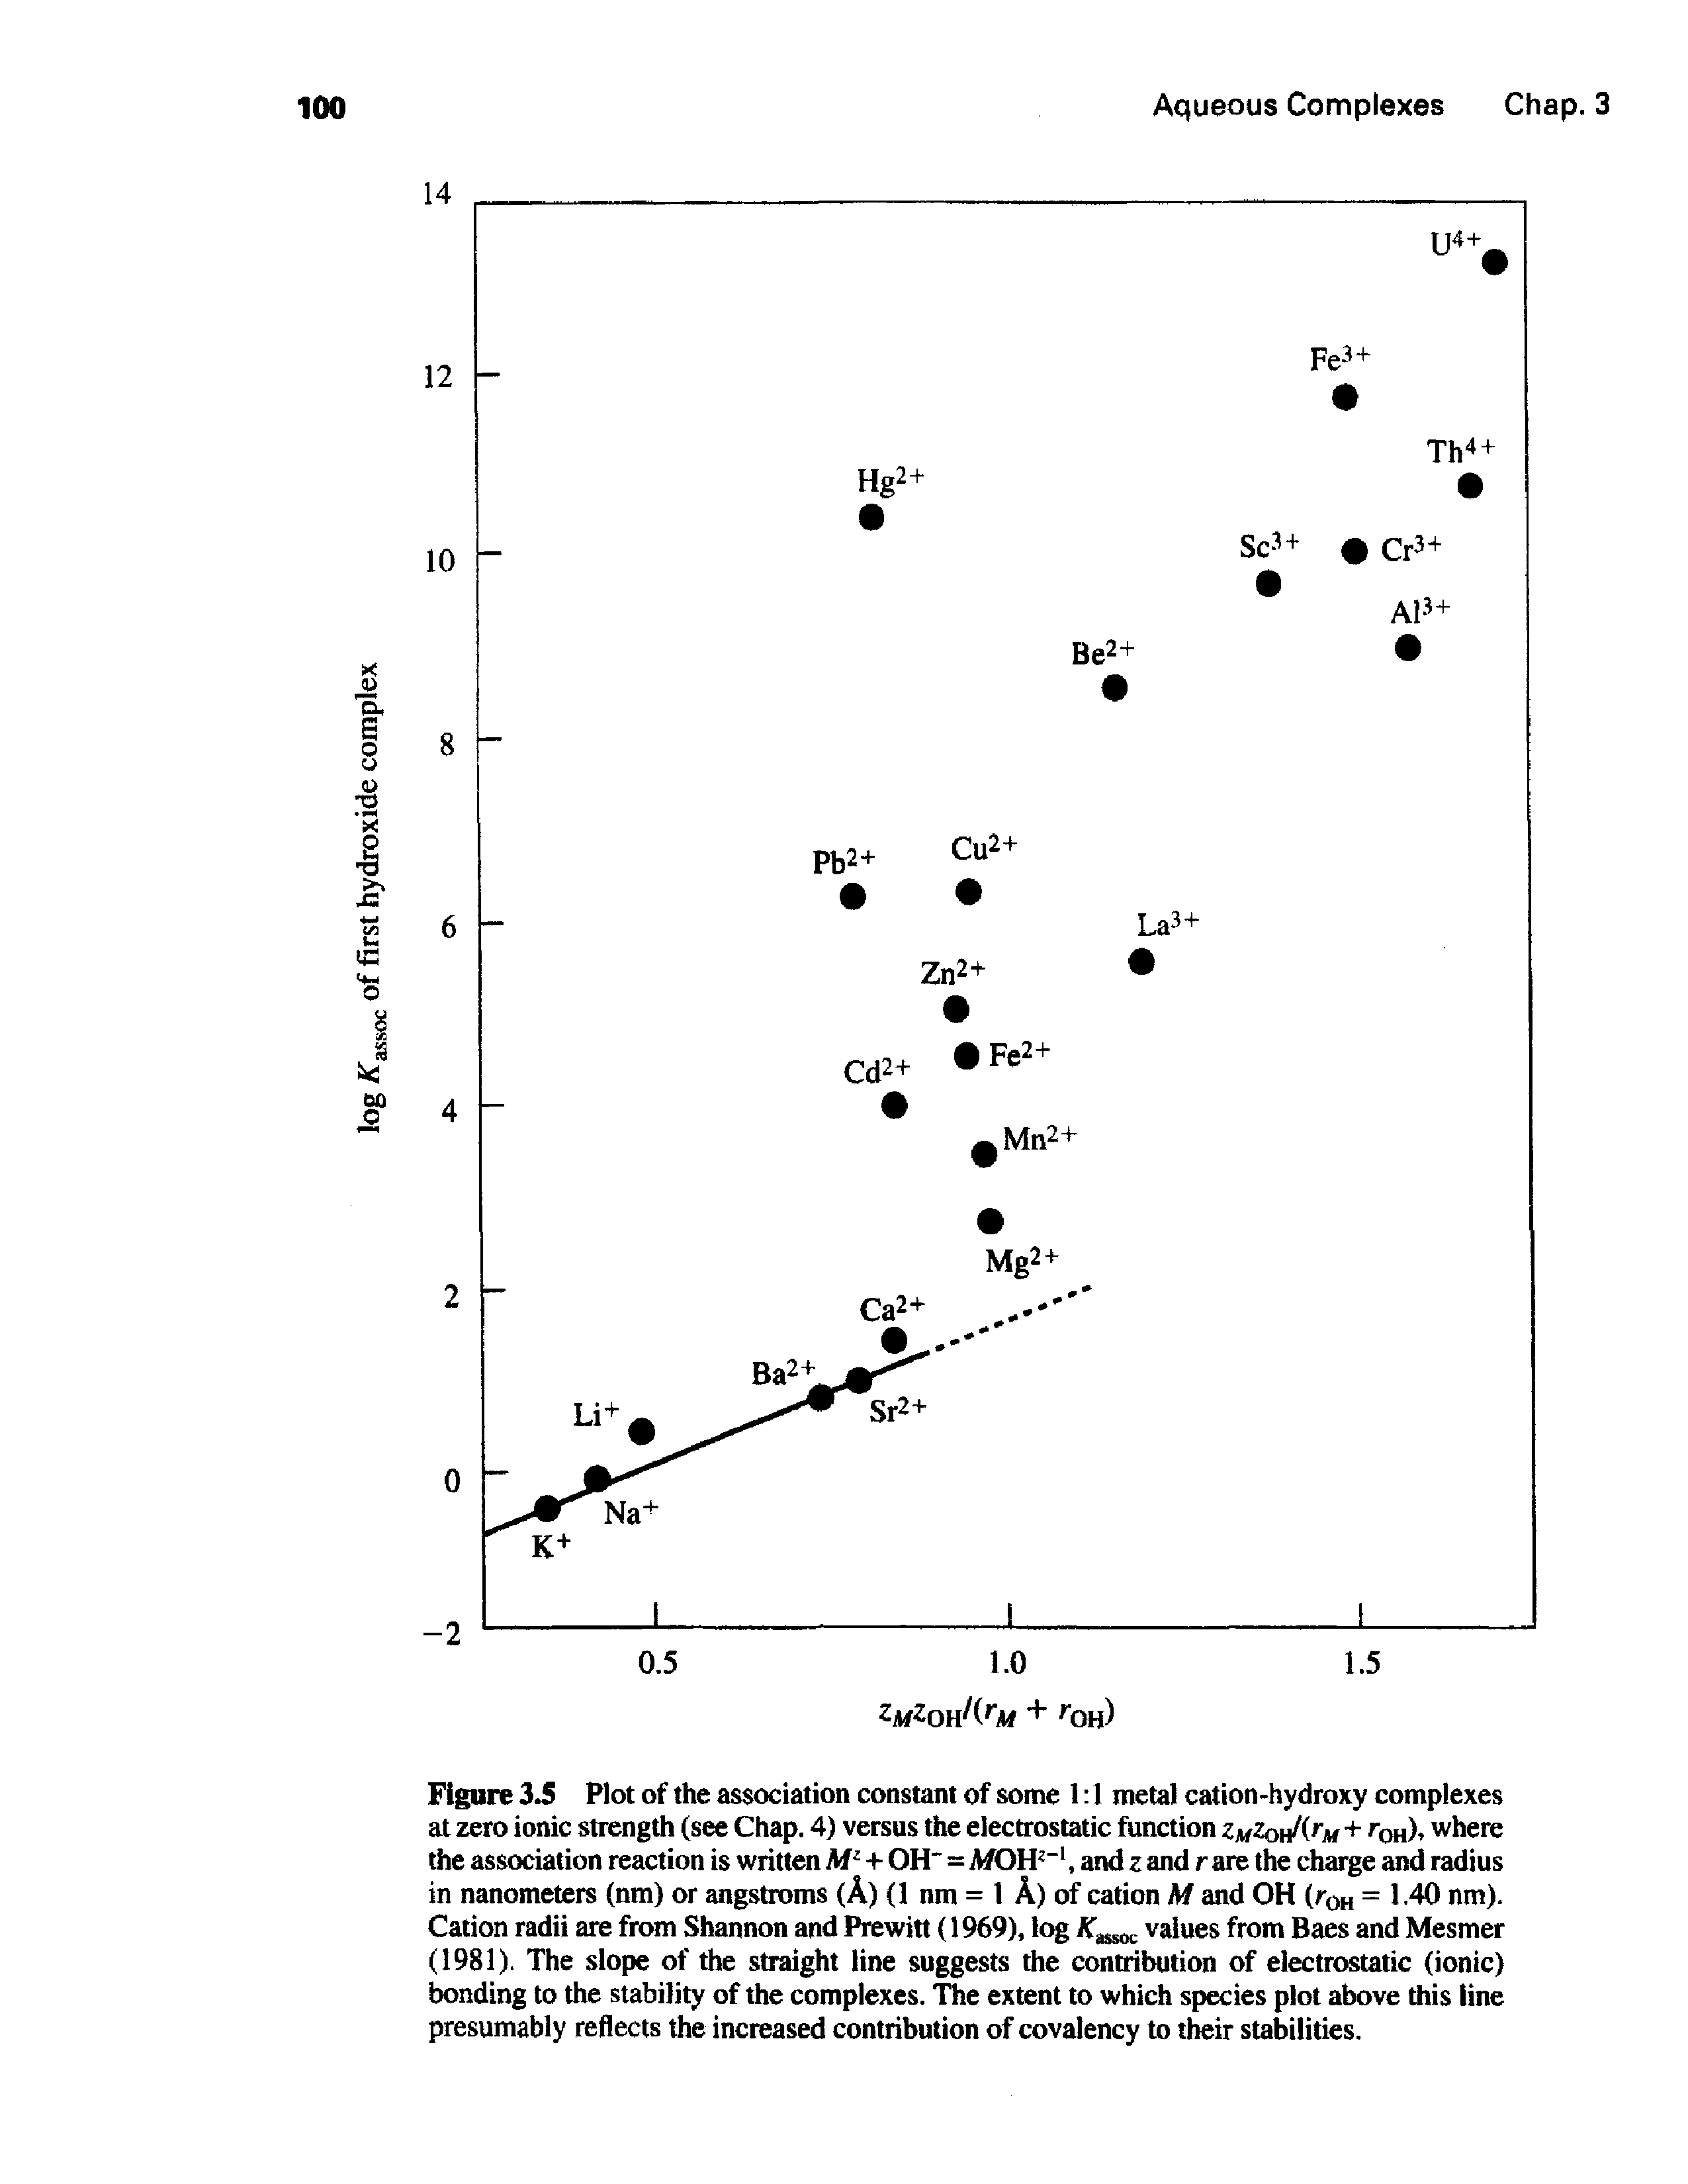 Figure 3.5 Plot of the association constant of some 1 1 metal cation-hydroxy complexes at zero ionic strength (see Chap. 4) versus the electrostatic function luZon/irti + Toh). where the association reaction is written Af + OH"=A/OH " , and z and r are the charge and radius in nanometers (nm) or angstroms (A) (1 nm = 1 A) of cation M and OH ( oh = 1-40 nm). Cation radii are from Shannon and Prewitt (1969), log values from Baes and Mesmer (1981). The slope of the straight line suggests the contribution of electrostatic (ionic) bonding to the stability of the complexes. The extent to which species plot above this line presumably reflects the increased contribution of covalency to their stabilities.